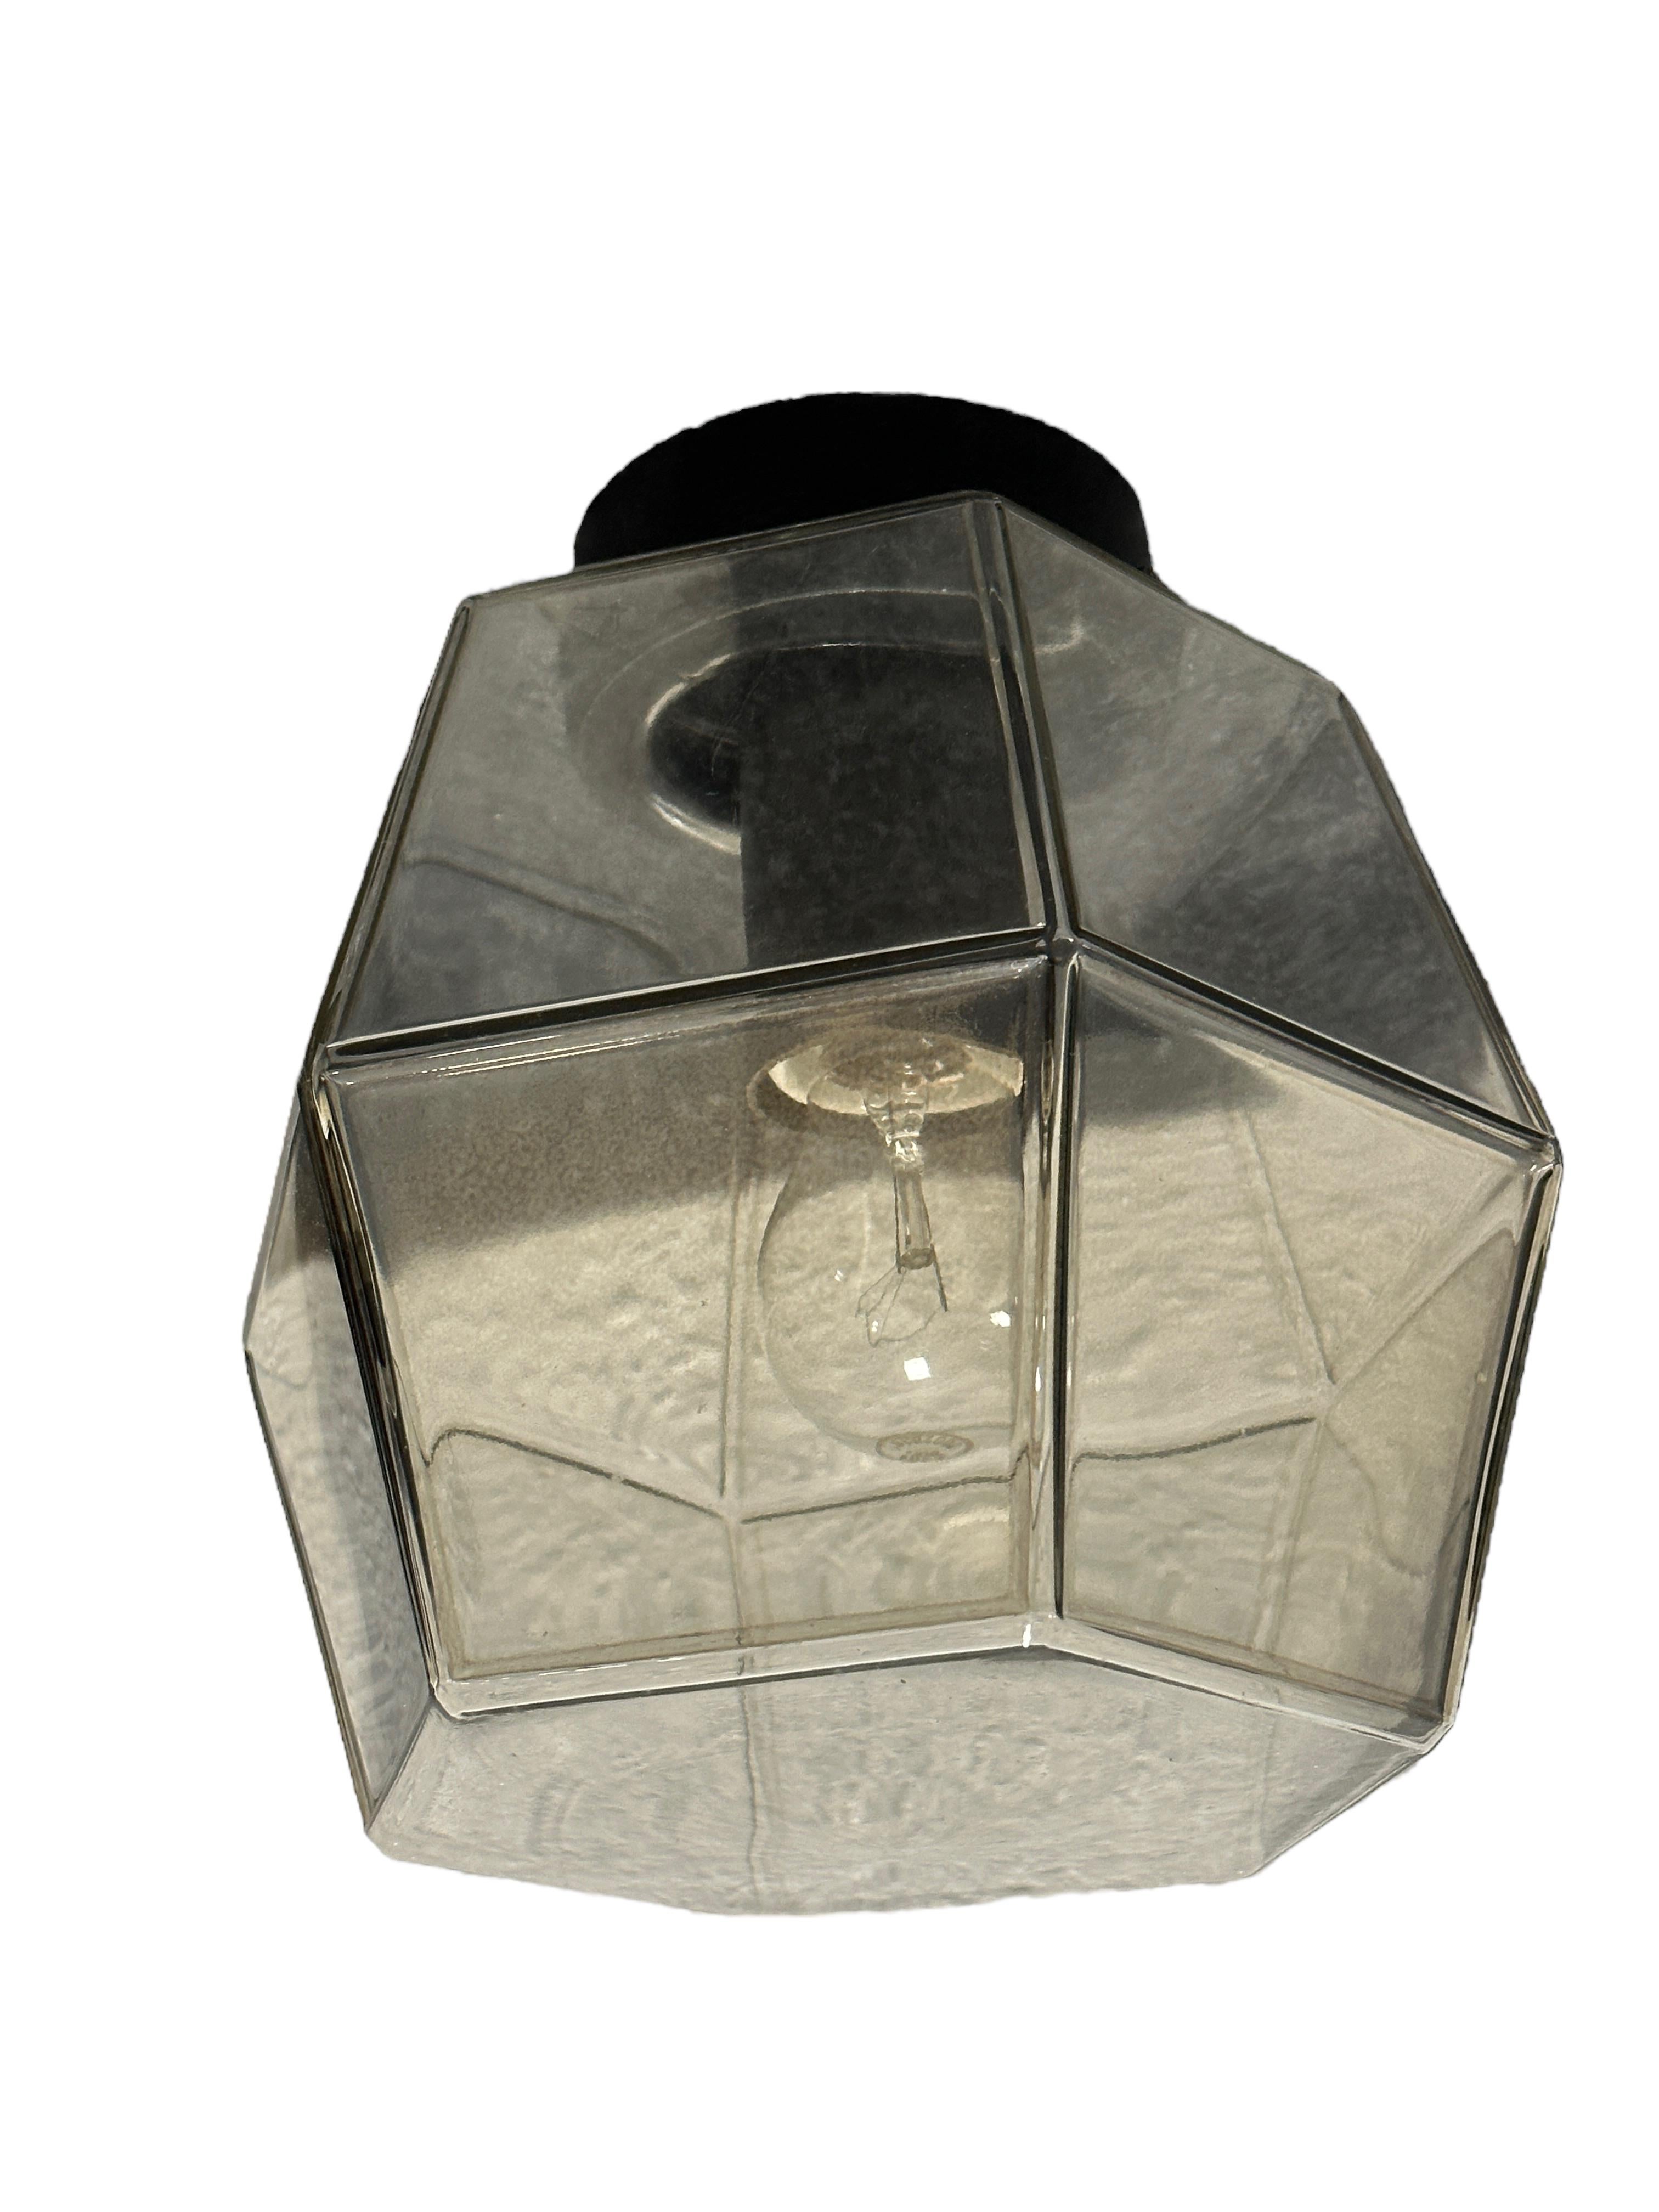 Late 20th Century Hexagonal Smoked Glass Flush Mount by RZB Leuchten Germany, 1970s For Sale